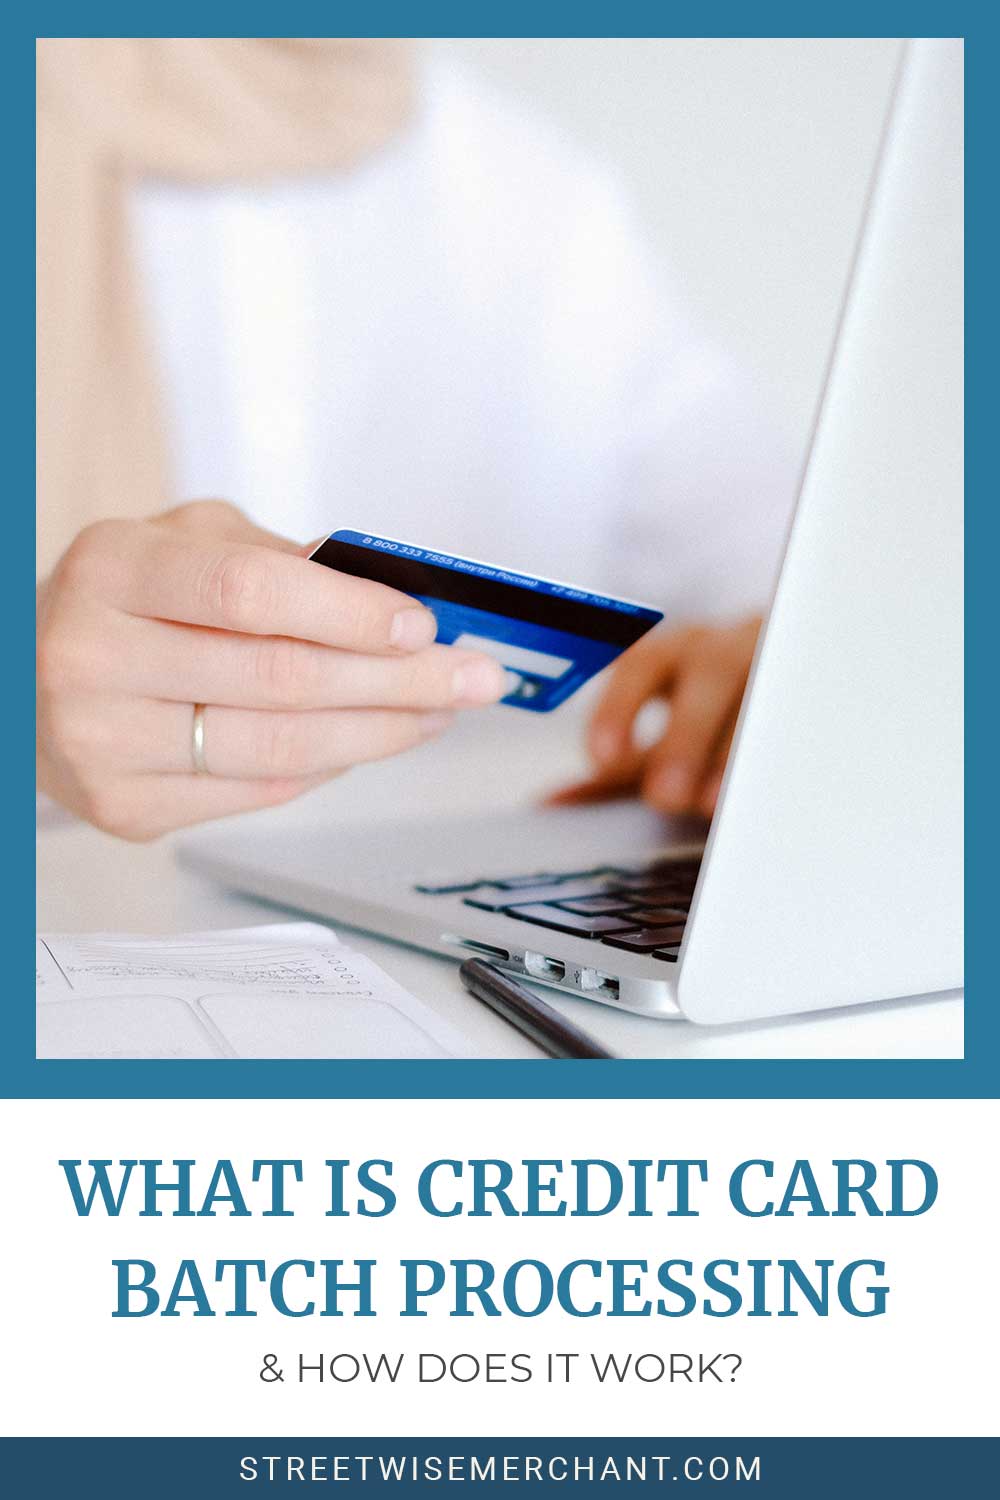 What Is Credit Card Batch Processing & How Does It Work?